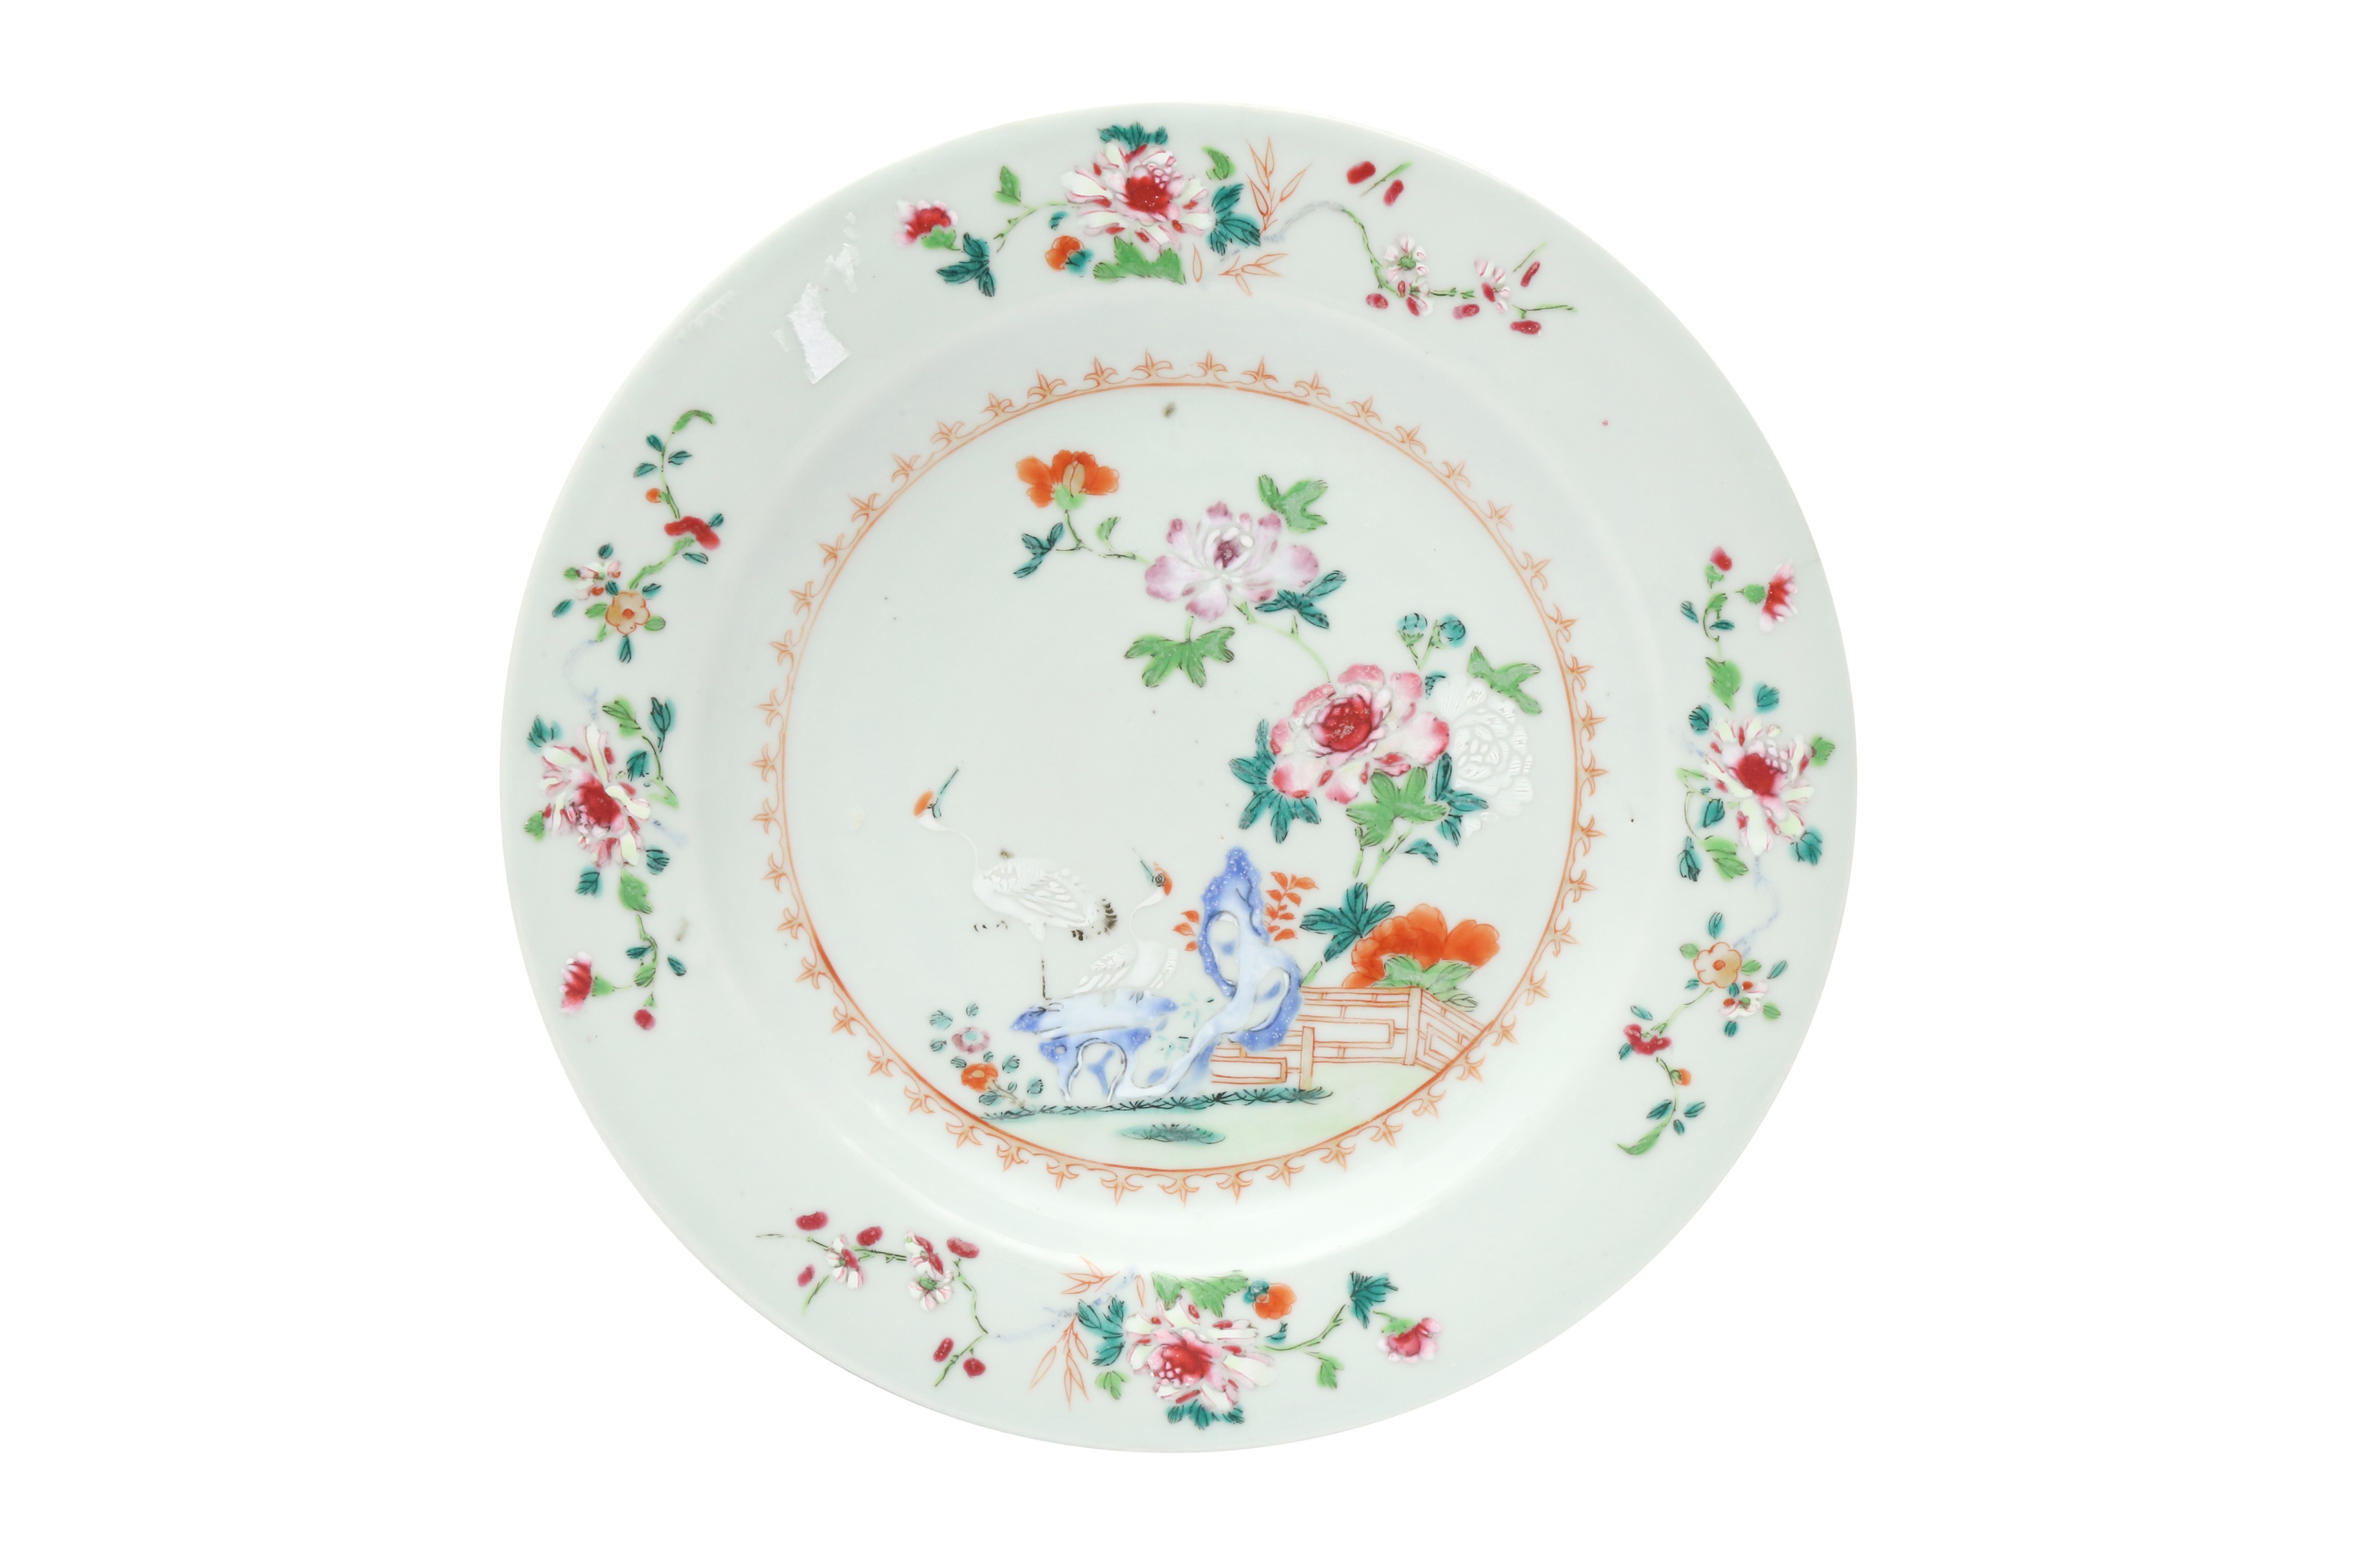 TWO CHINESE EXPORT FAMILLE-ROSE 'CRANES AND BLOSSOMS' DISHES 清十八世紀 外銷粉彩牡丹鶴紋盤兩件 - Image 3 of 15